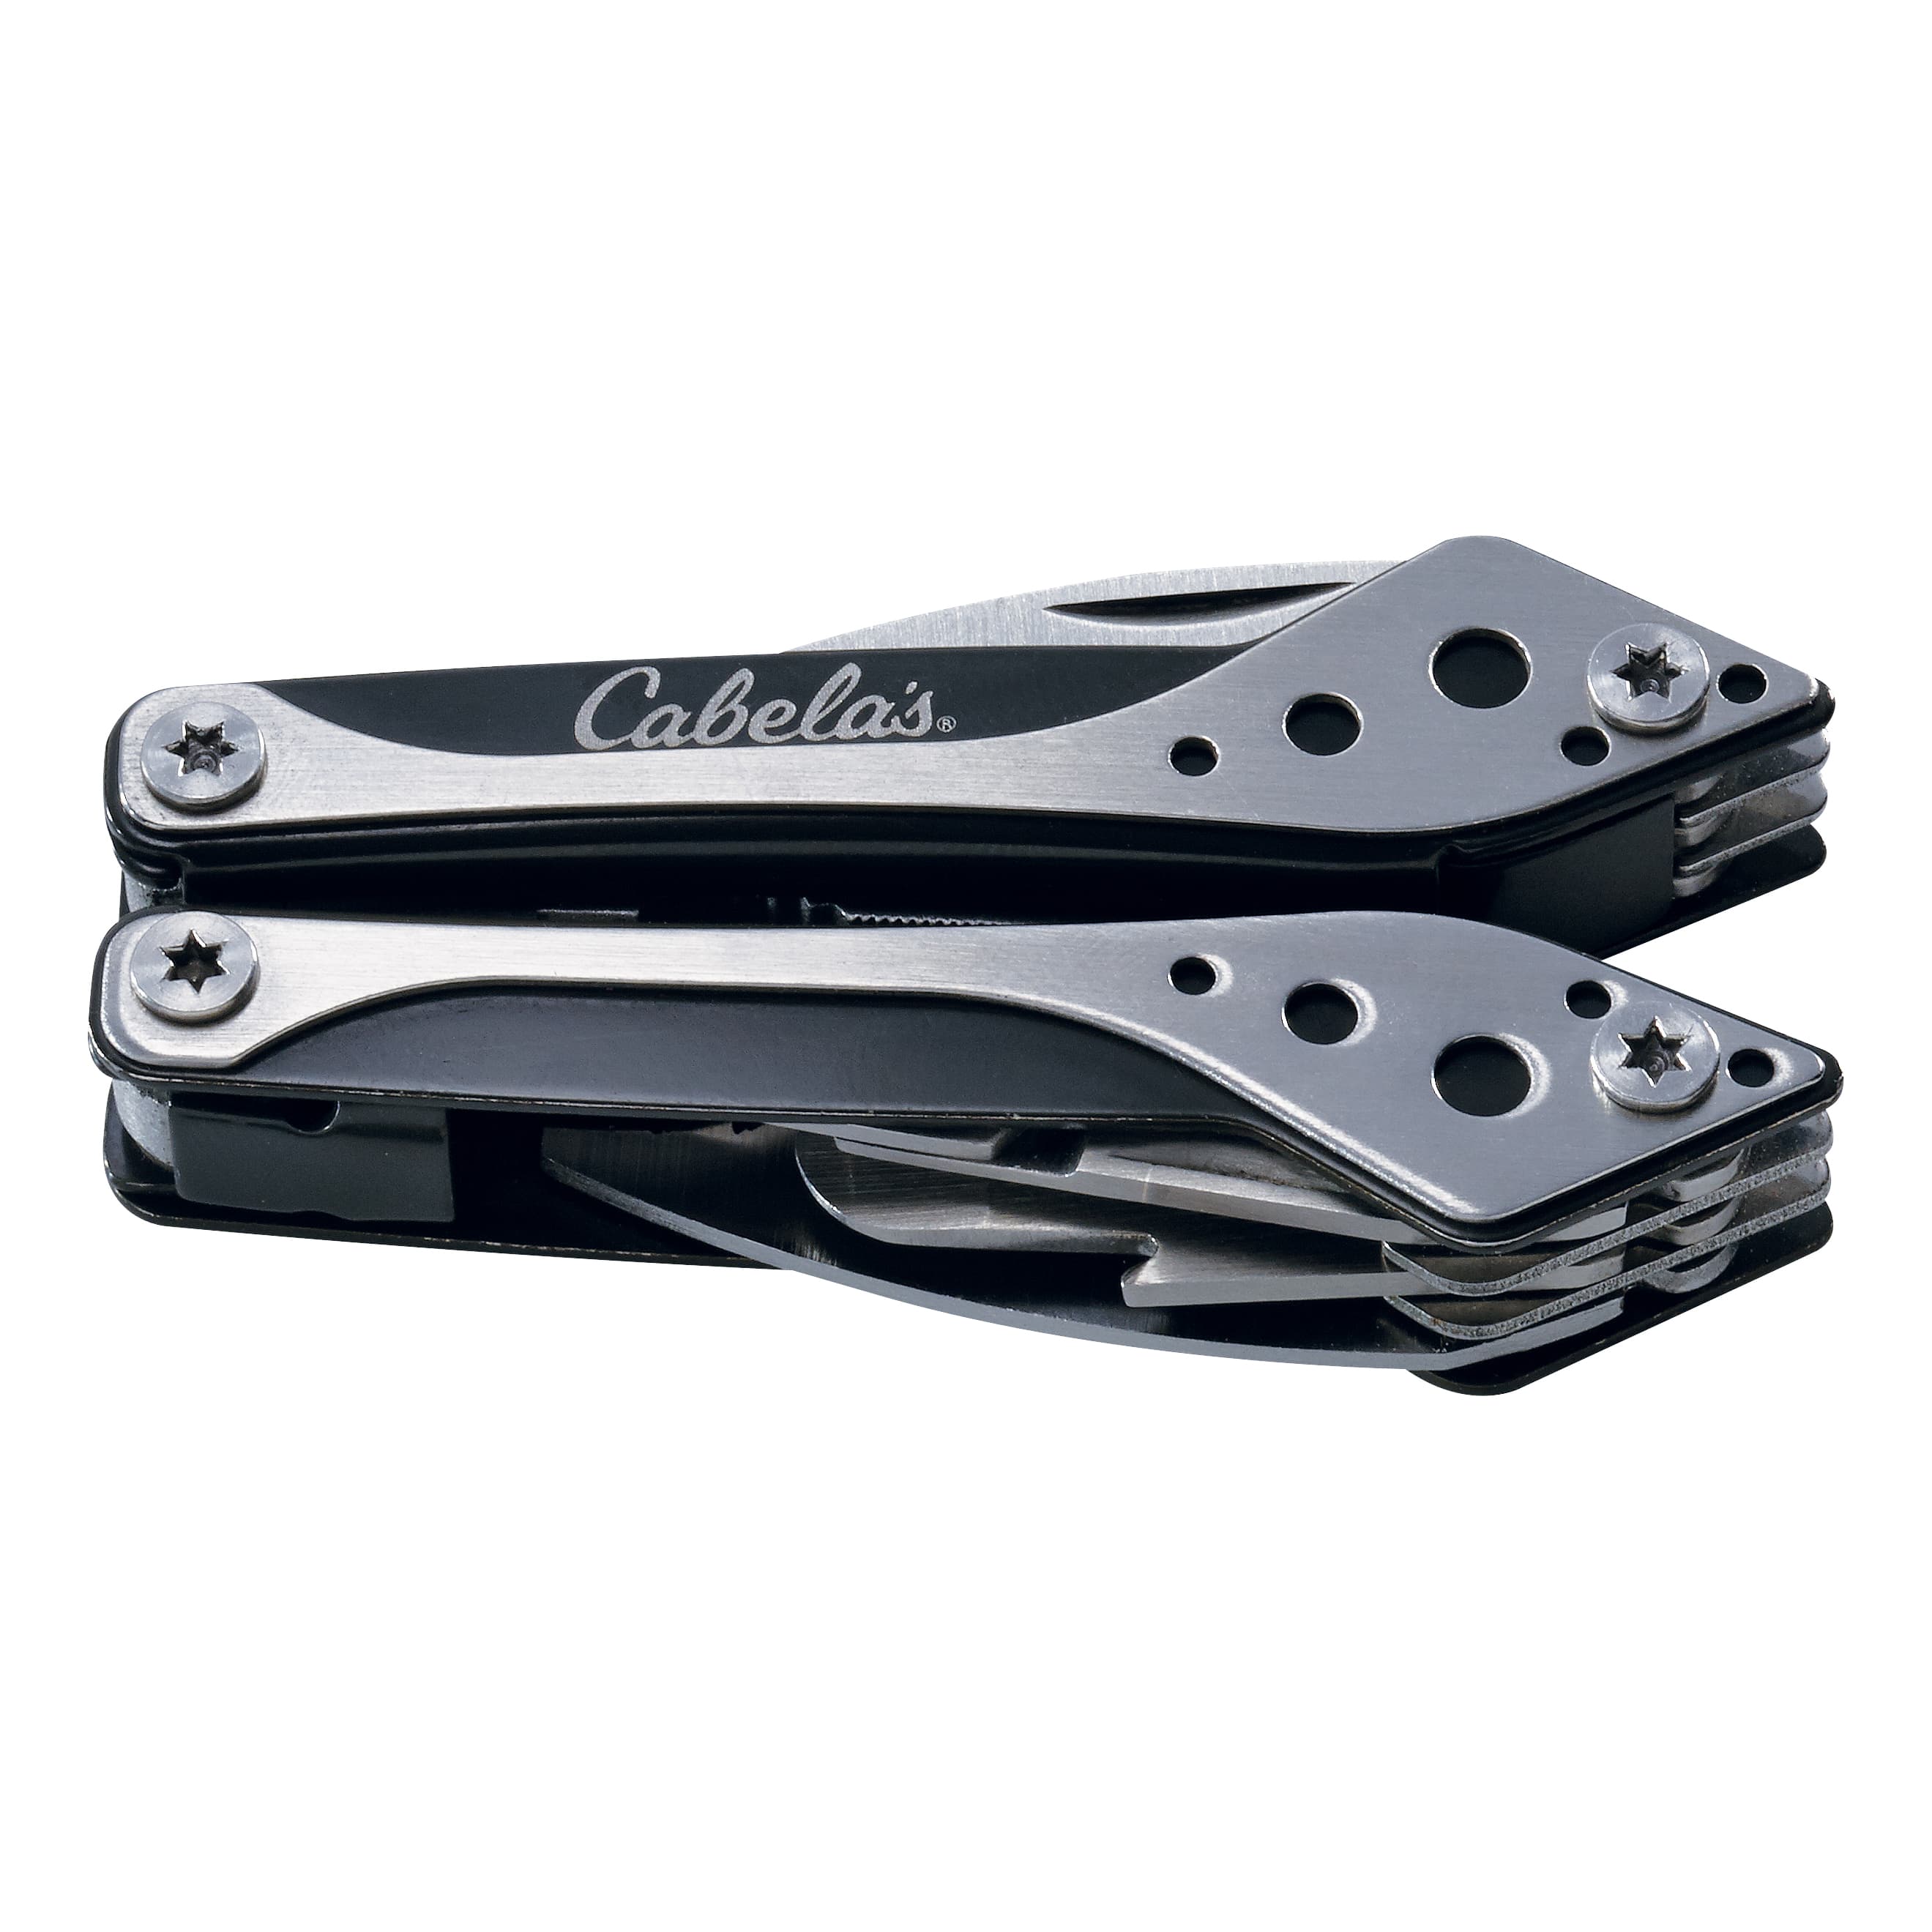 Cabela's Multitool - Silver - Closed View